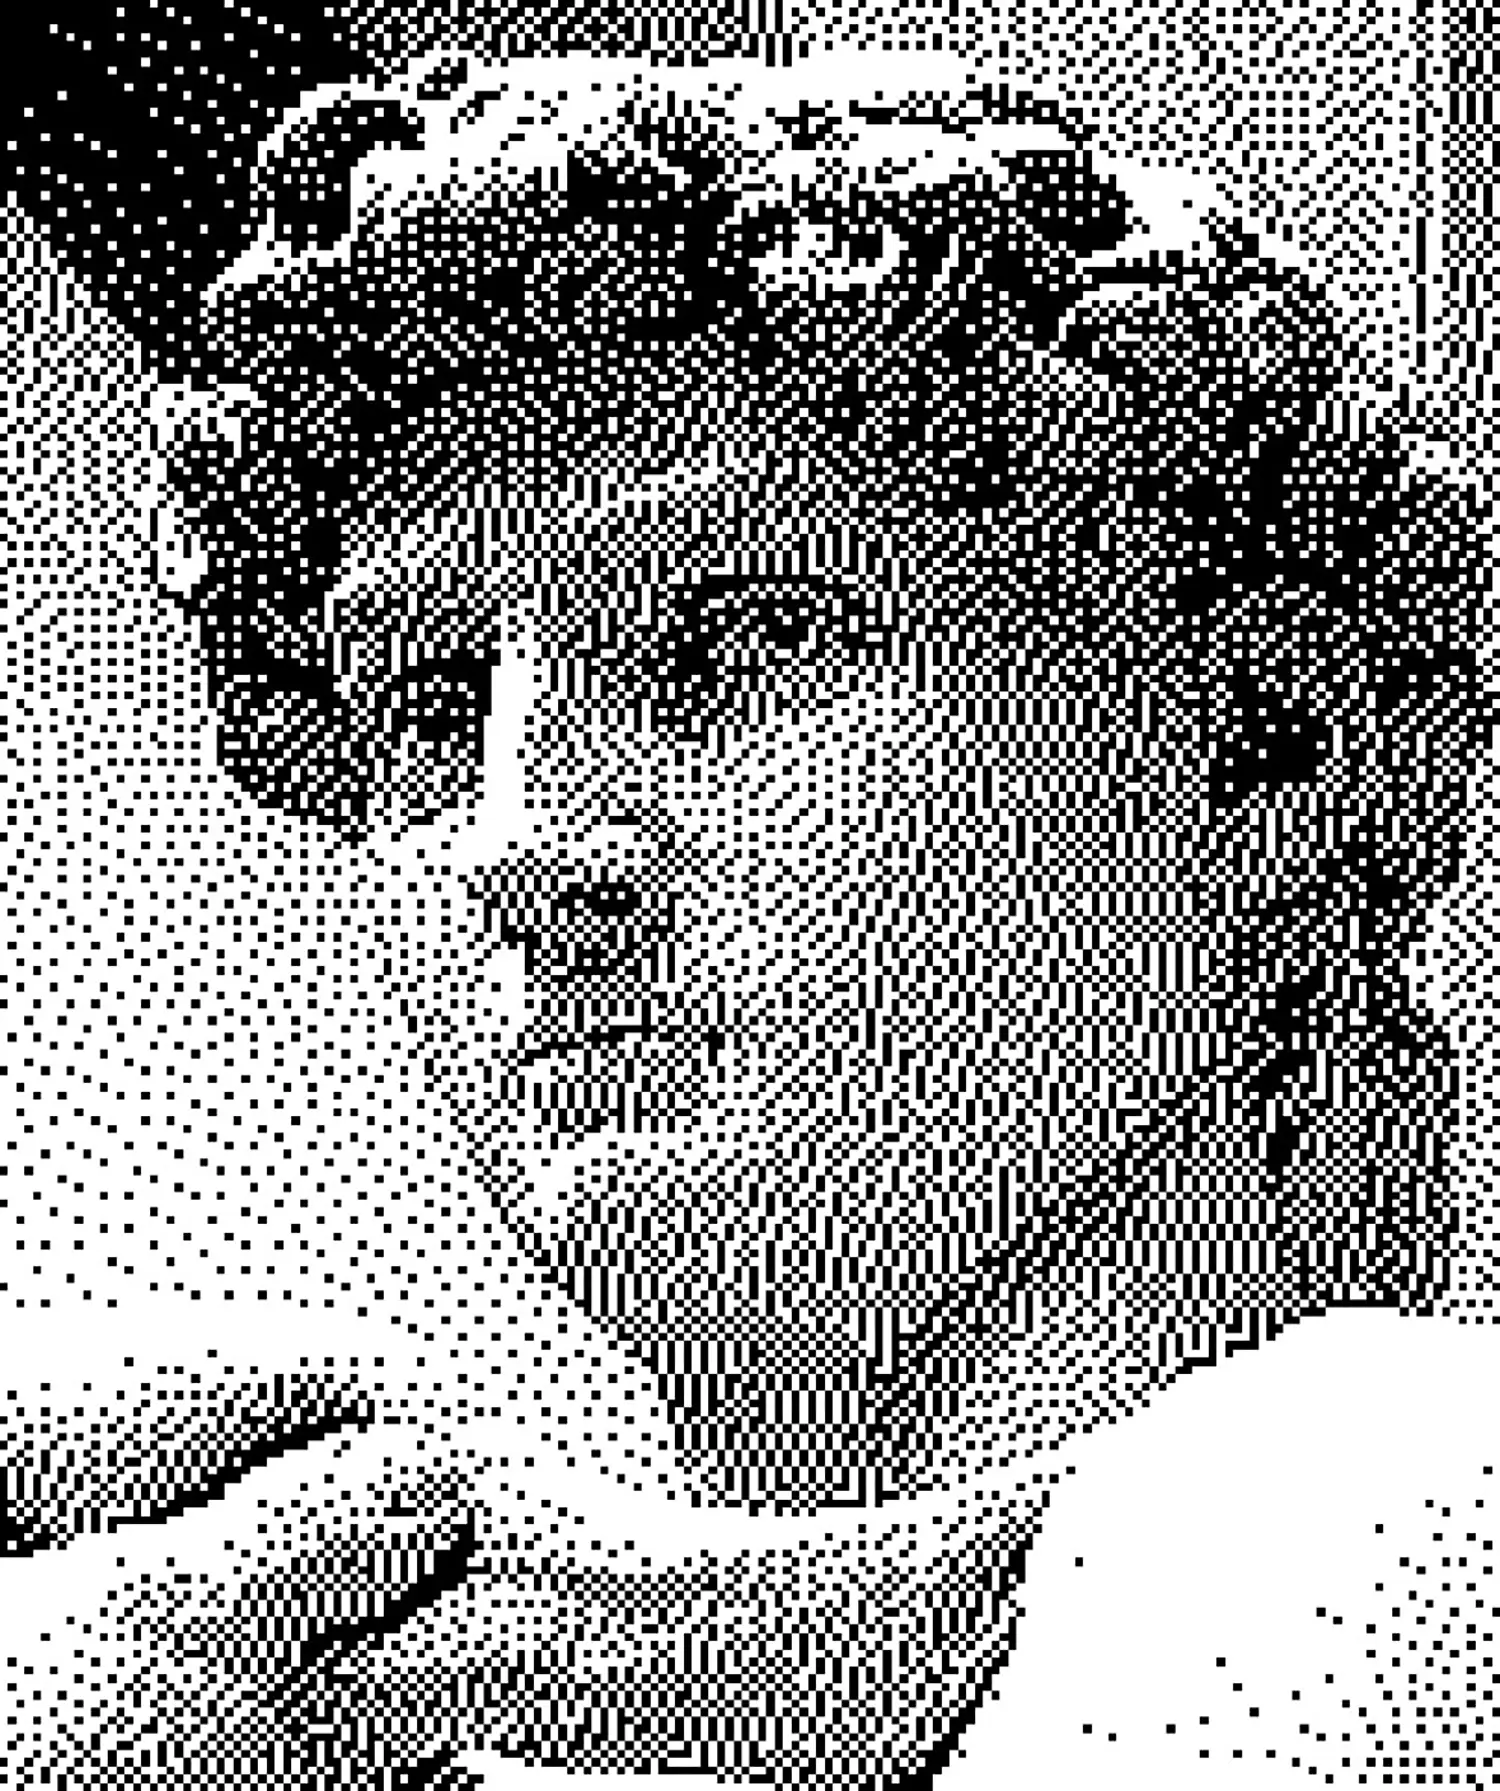 Michelangelo’s David rendered with black and white pixels.